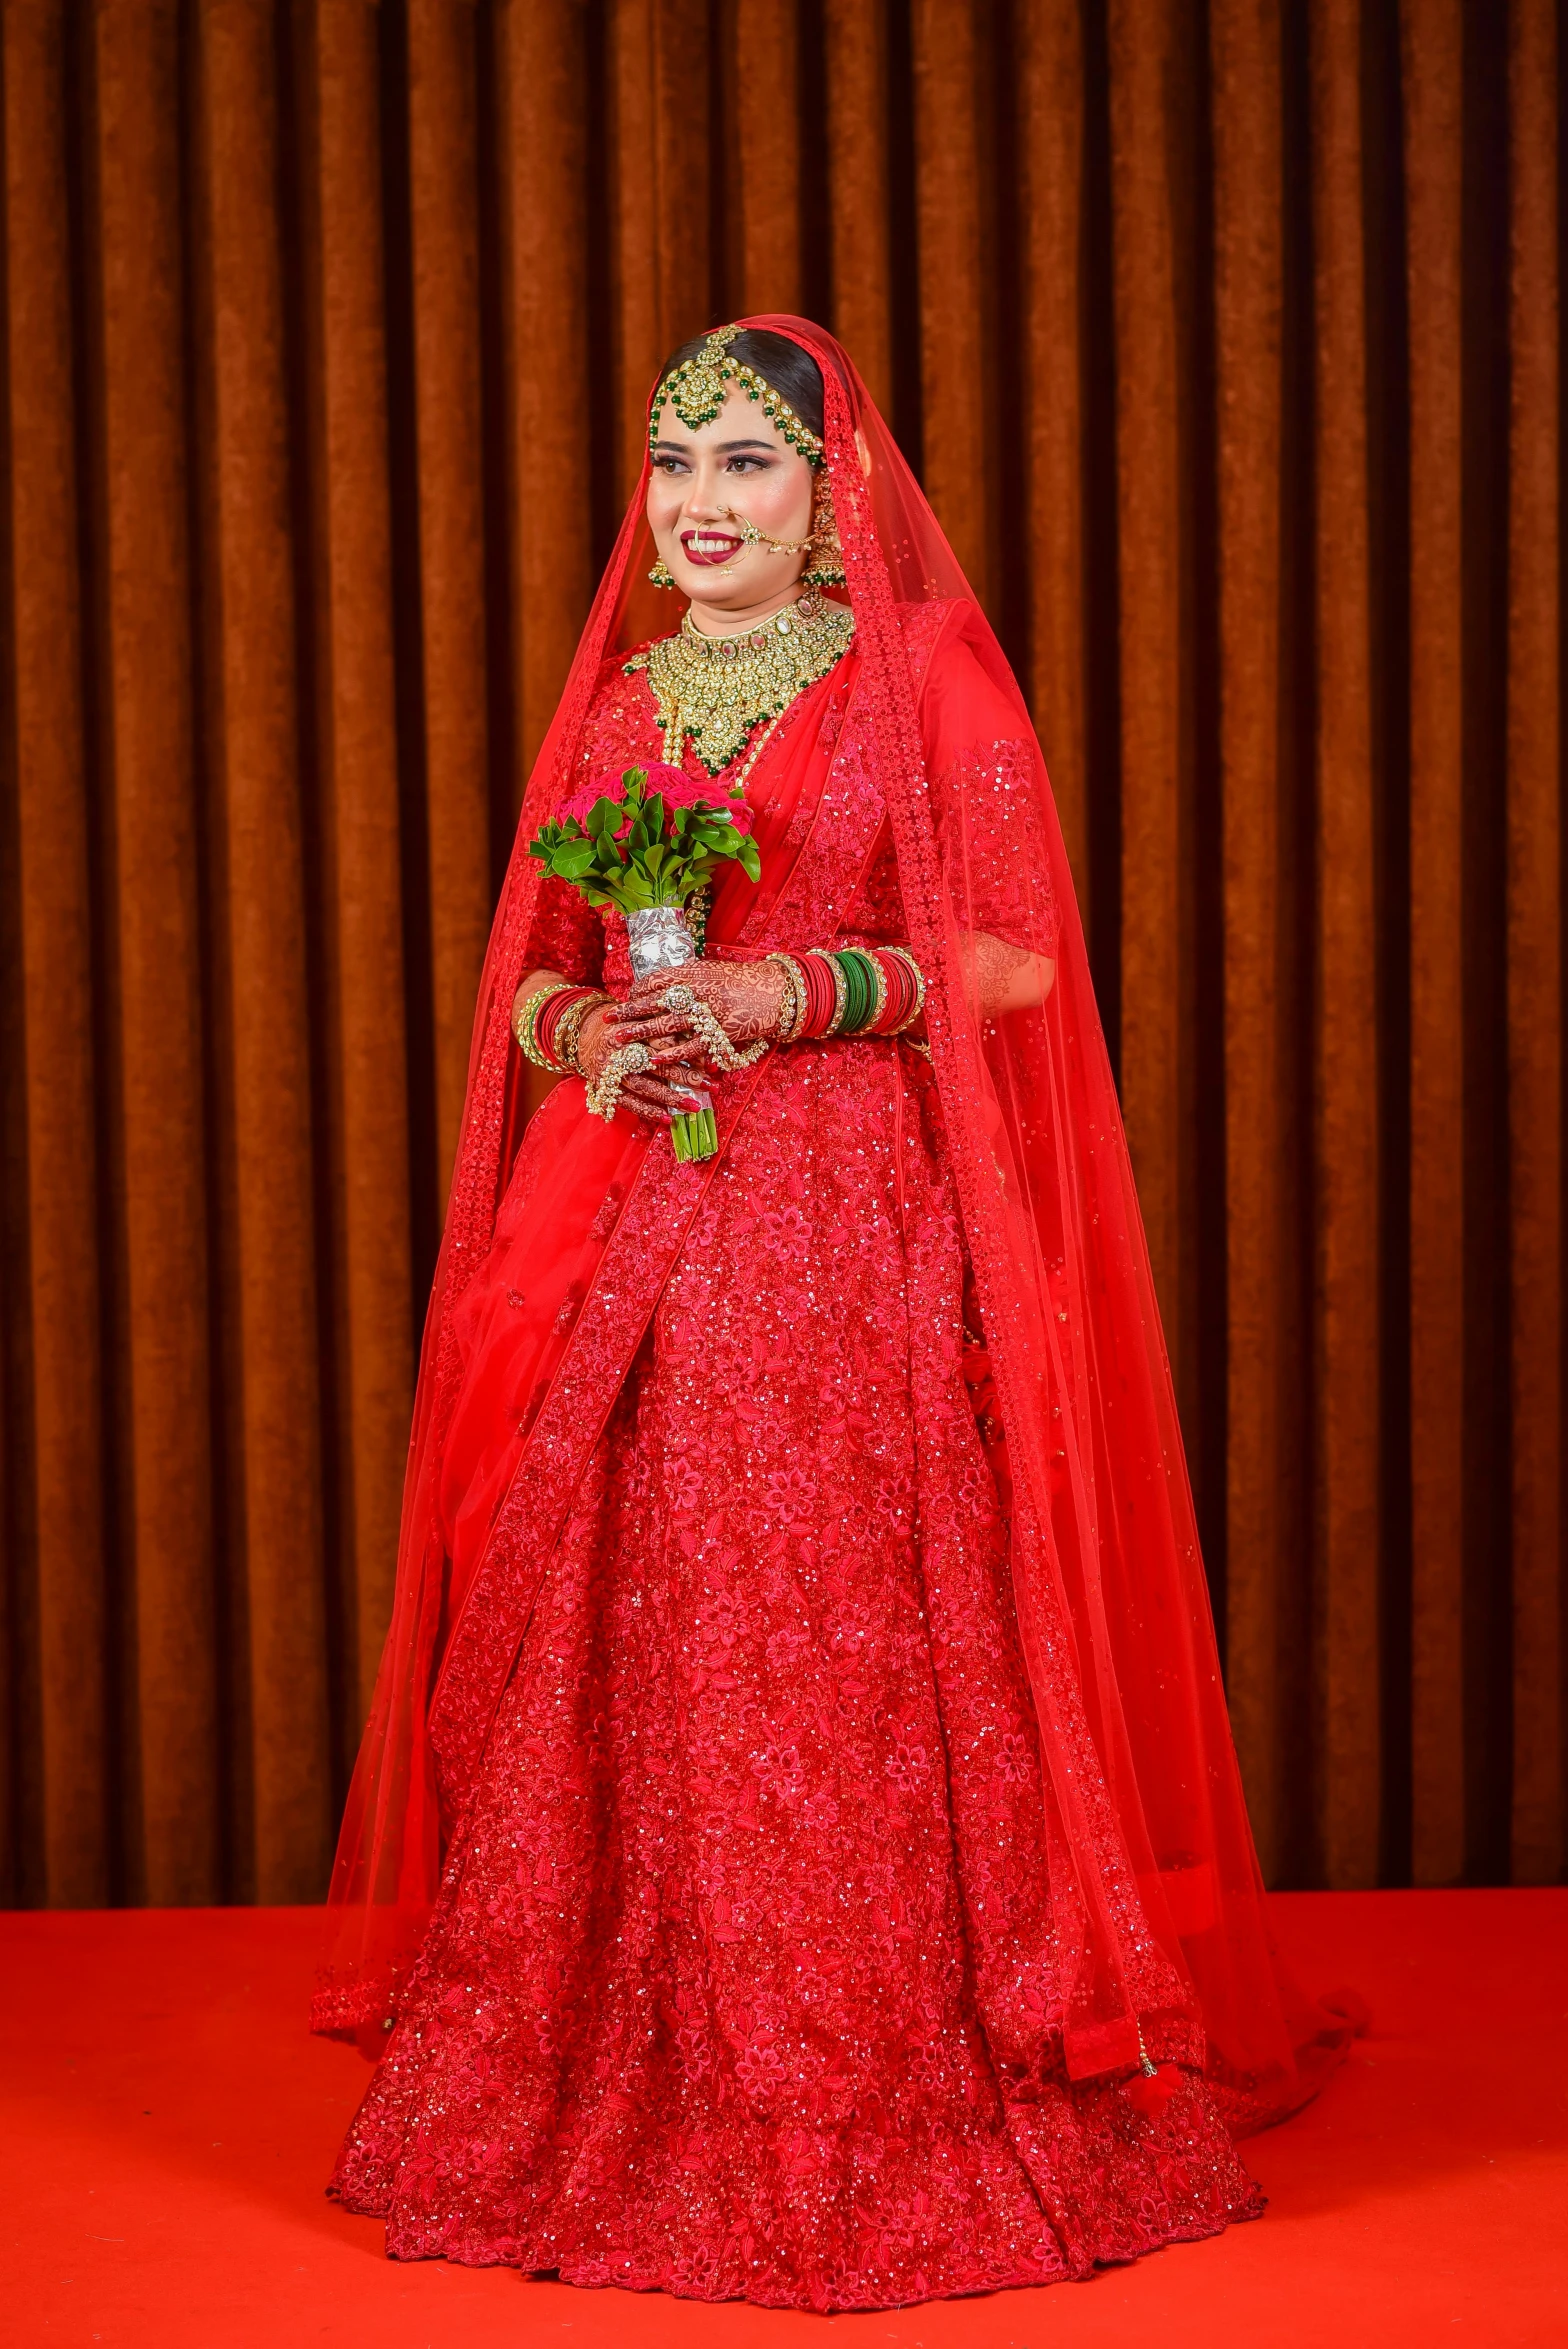 a woman wearing a red dress with gold accessories, a tiara and holding a rose